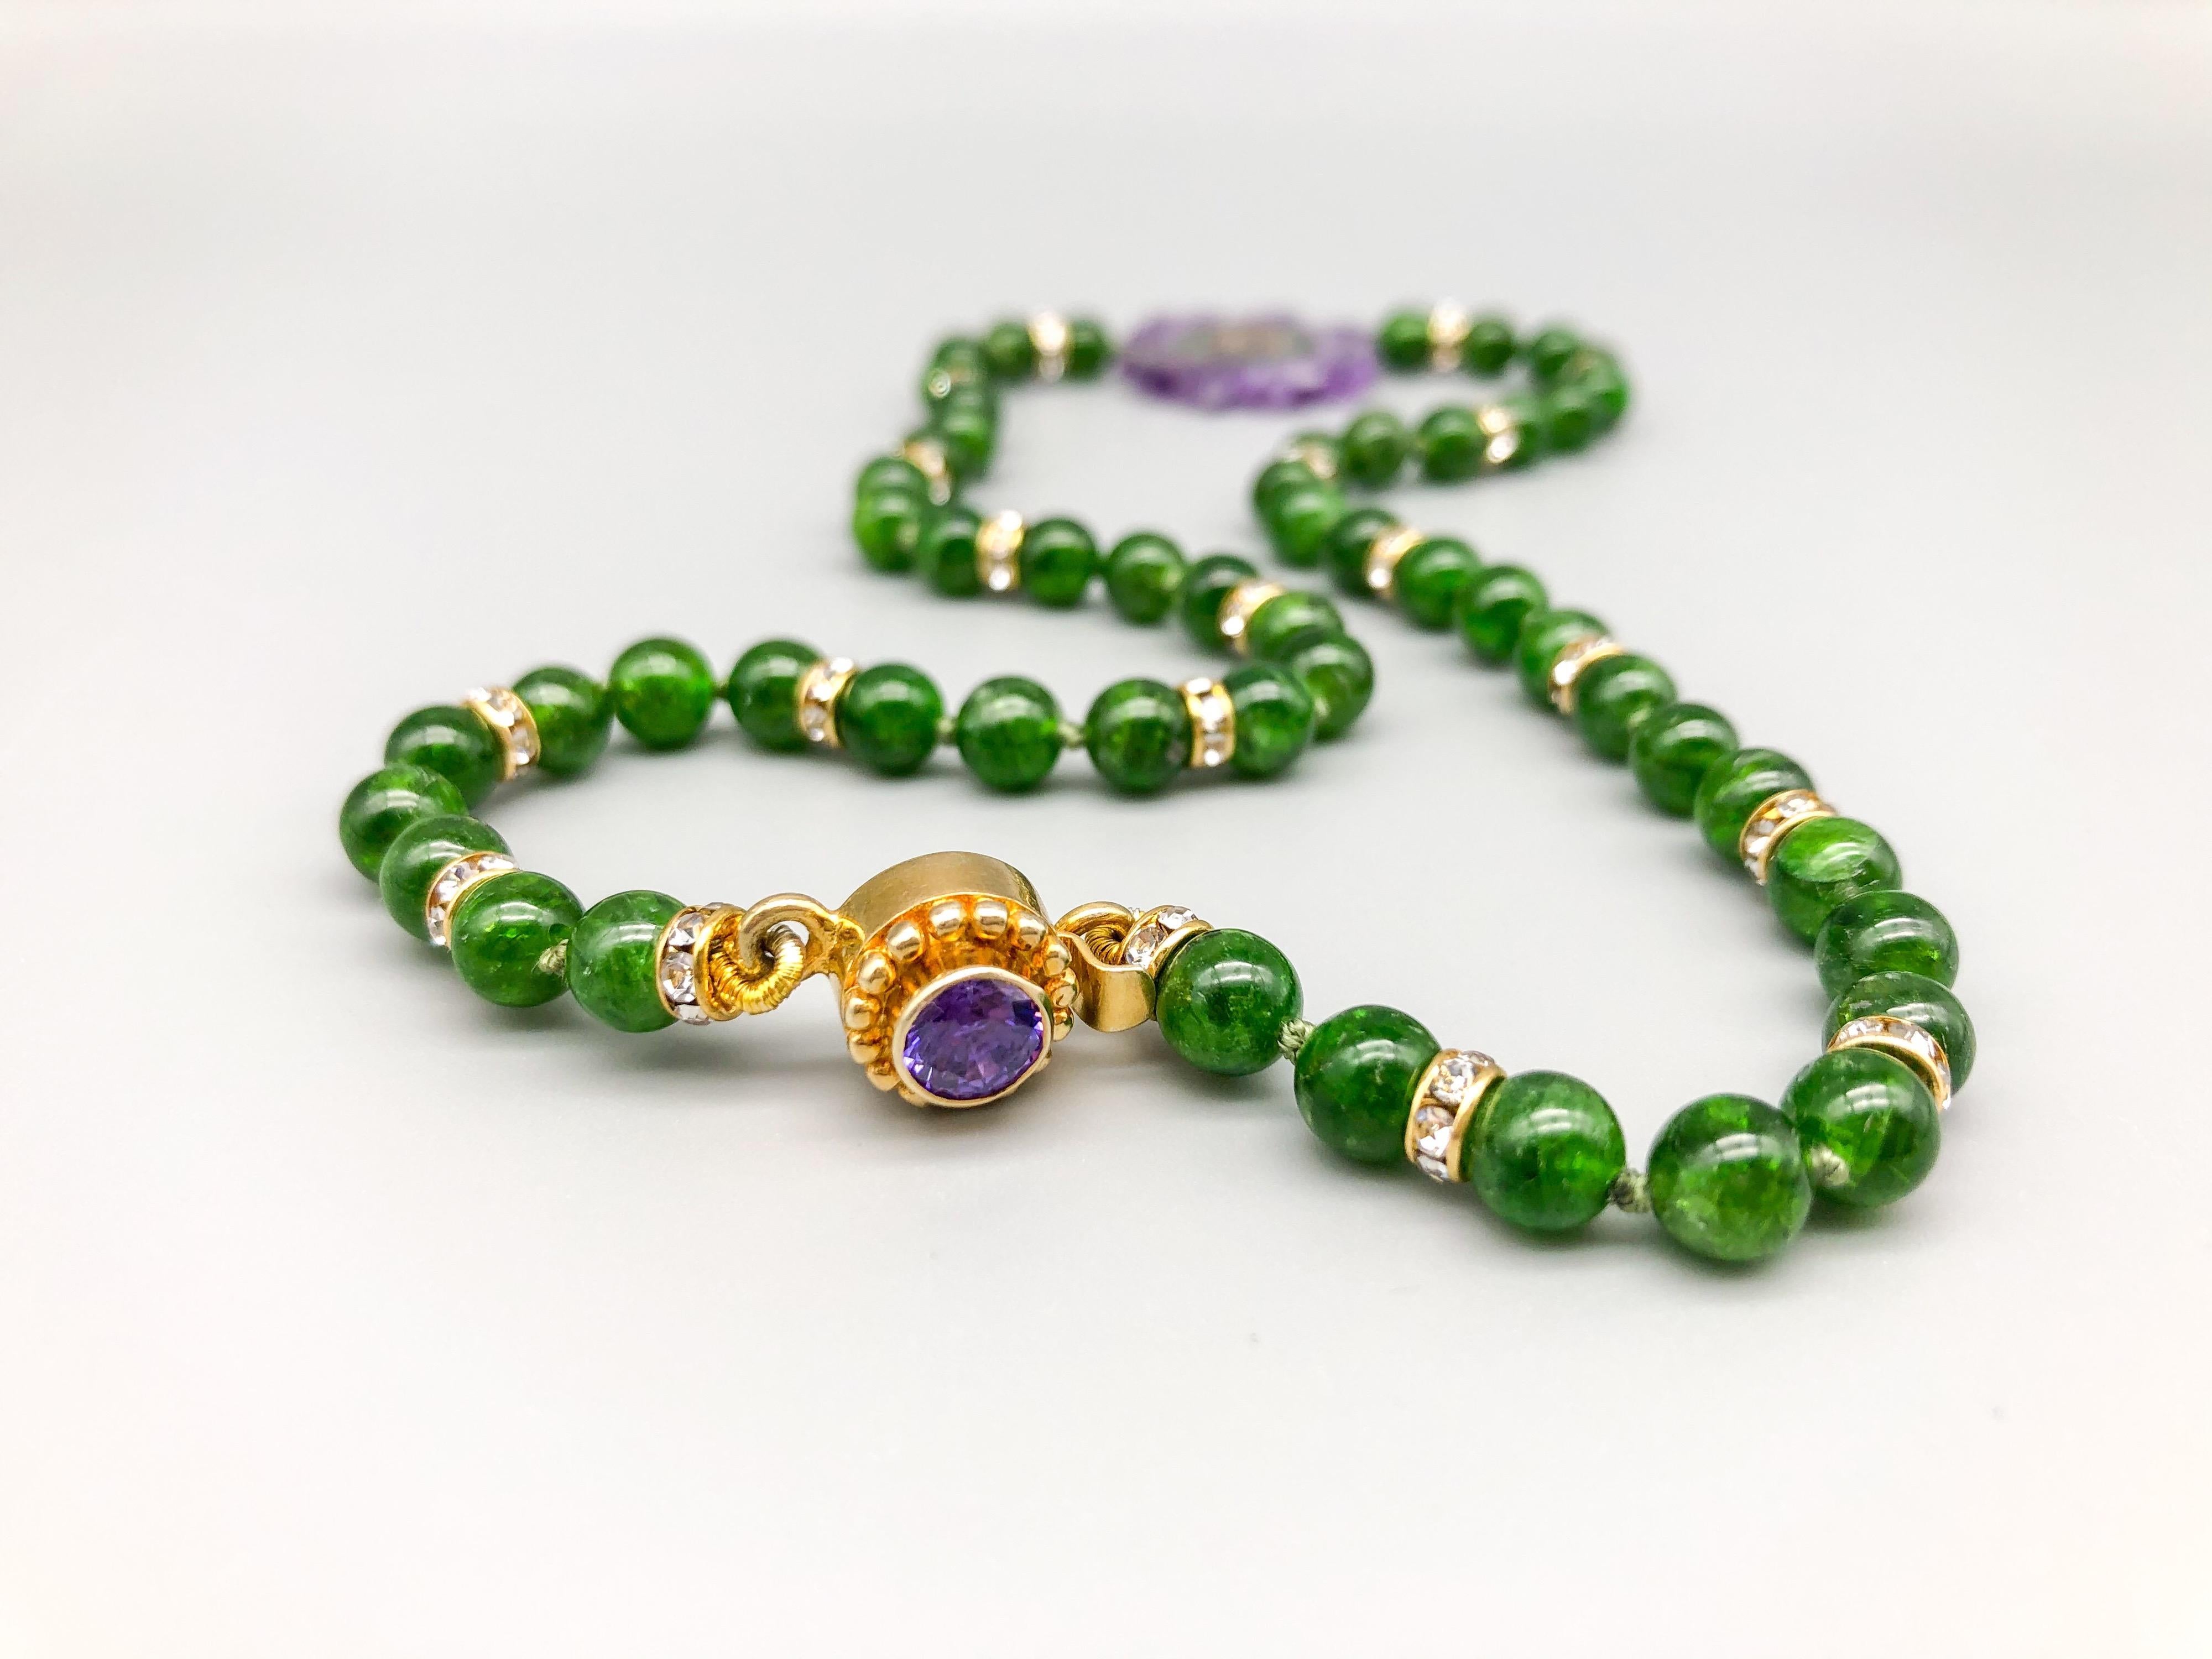 Contemporary A.Jeschel Chrome Diopside beads with an Amethyst Stalactite Pendant. For Sale